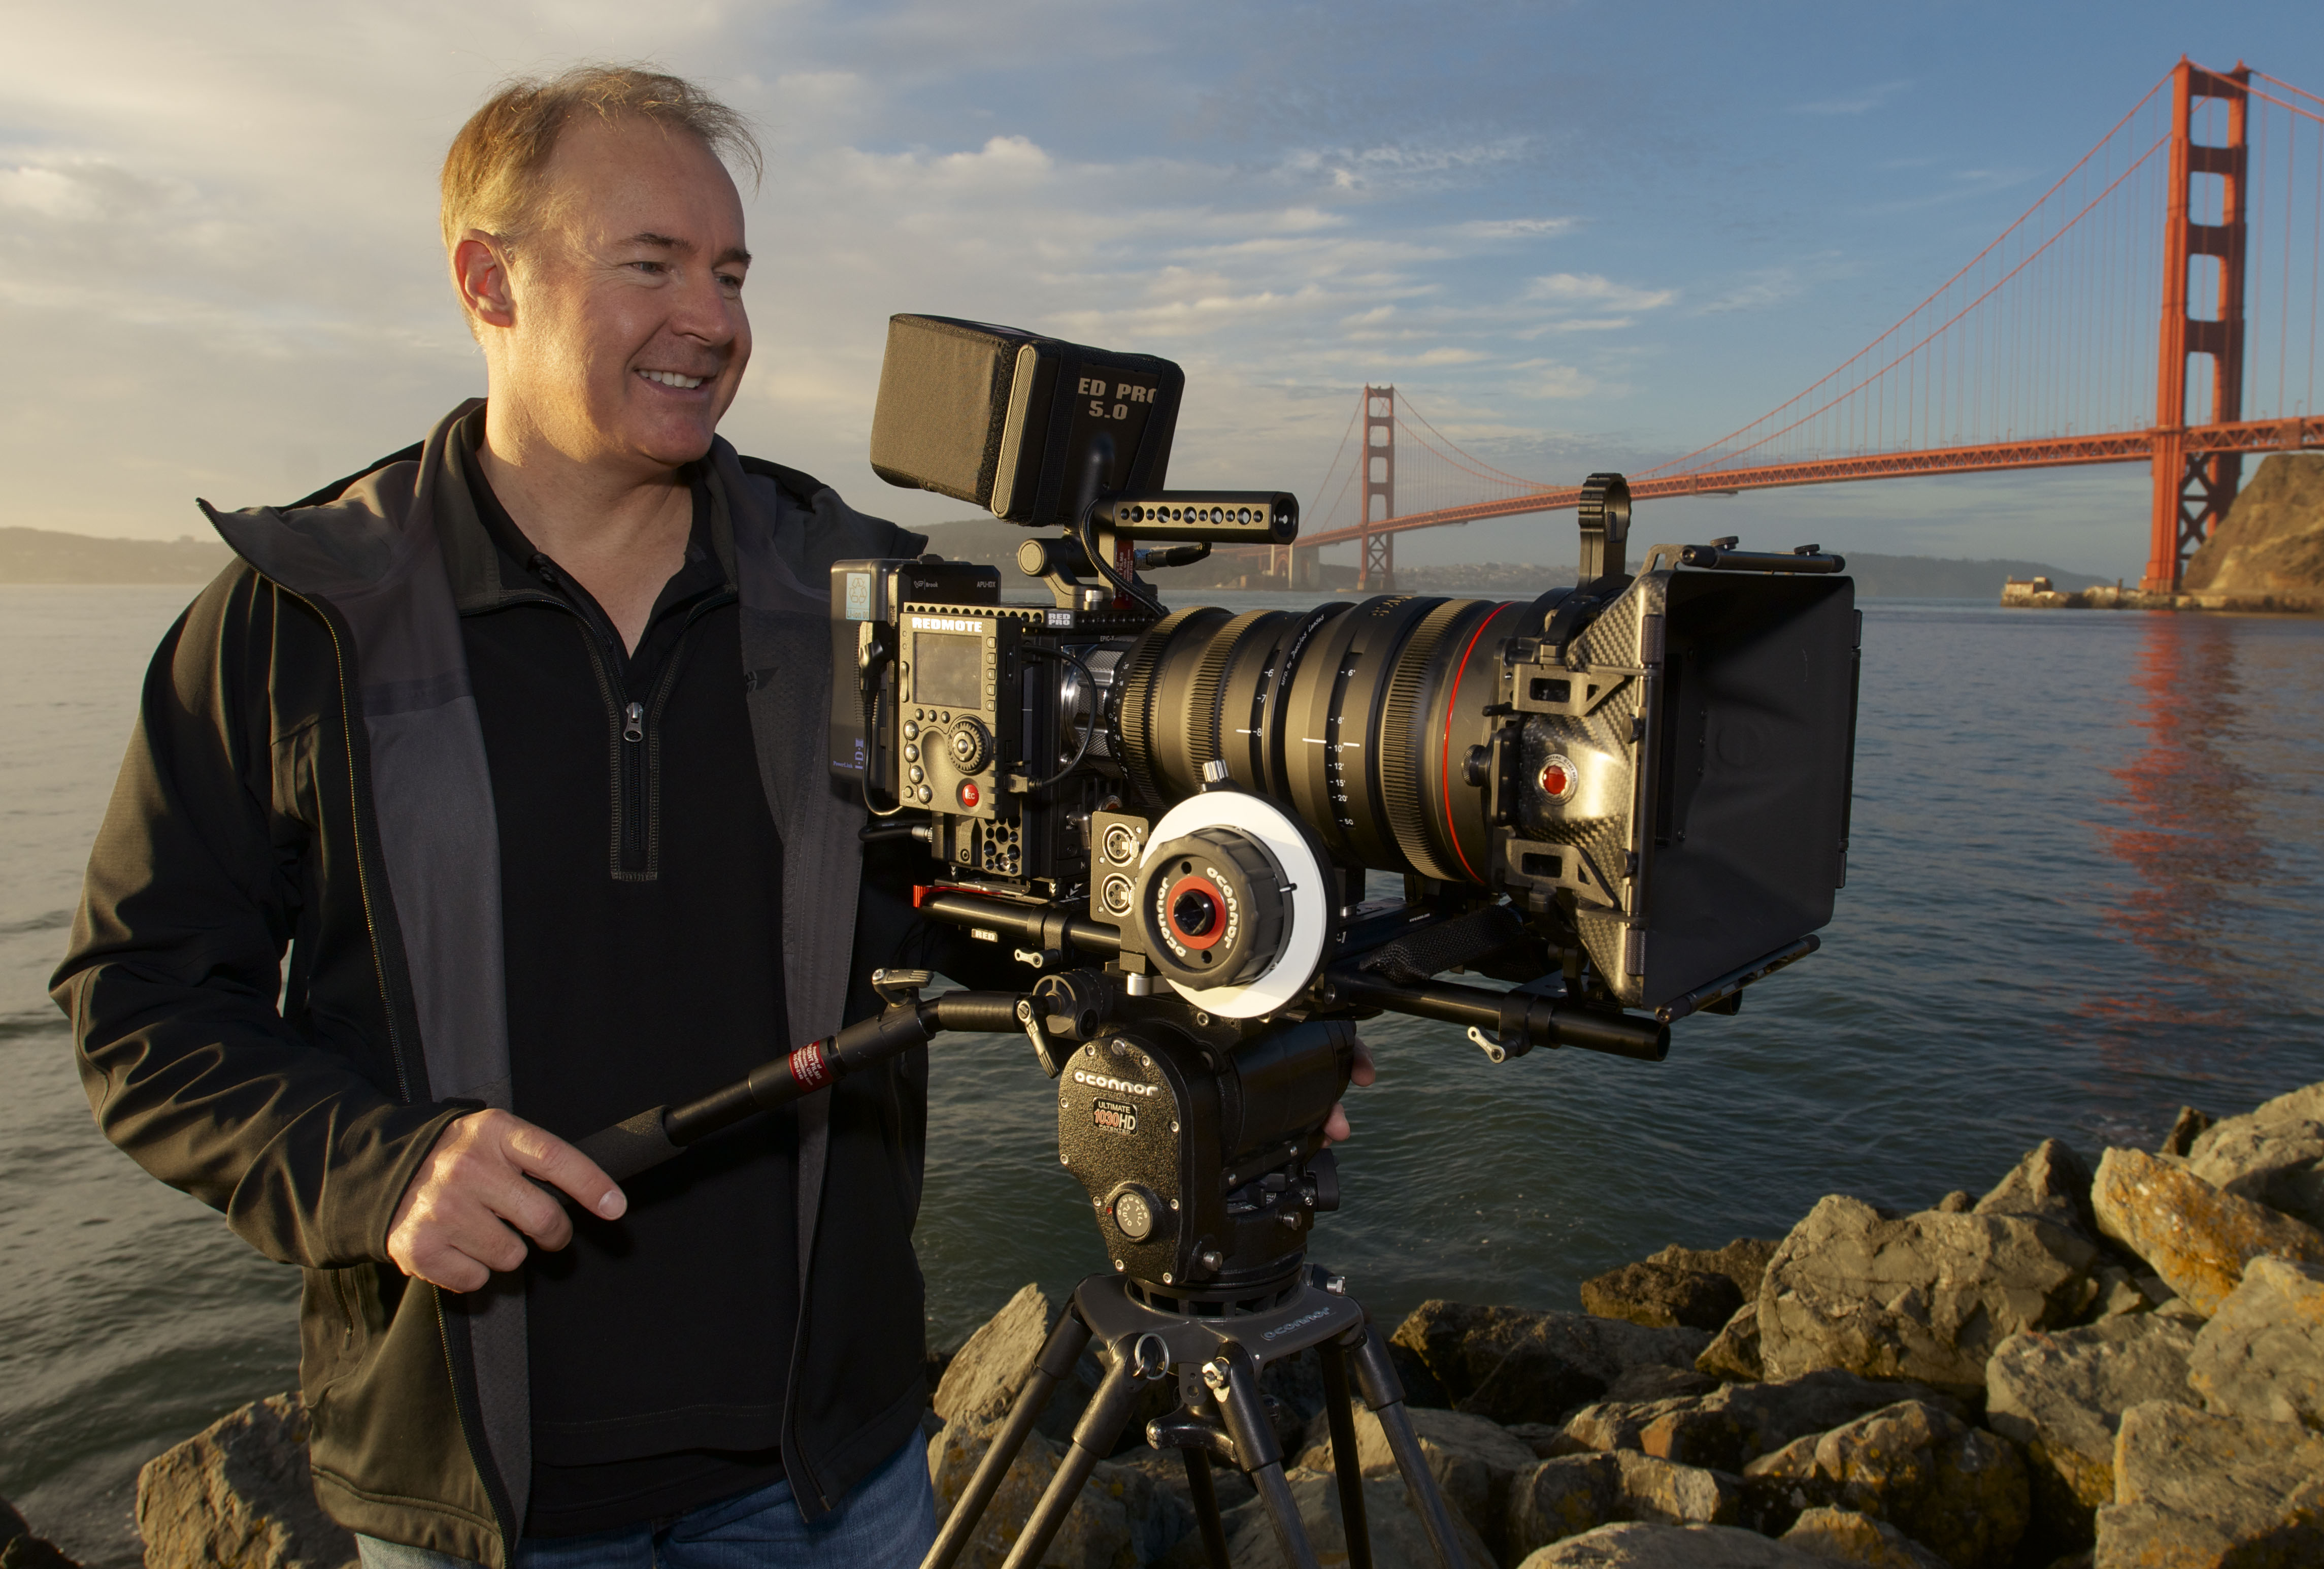 Carl Miller with his RED Epic camera